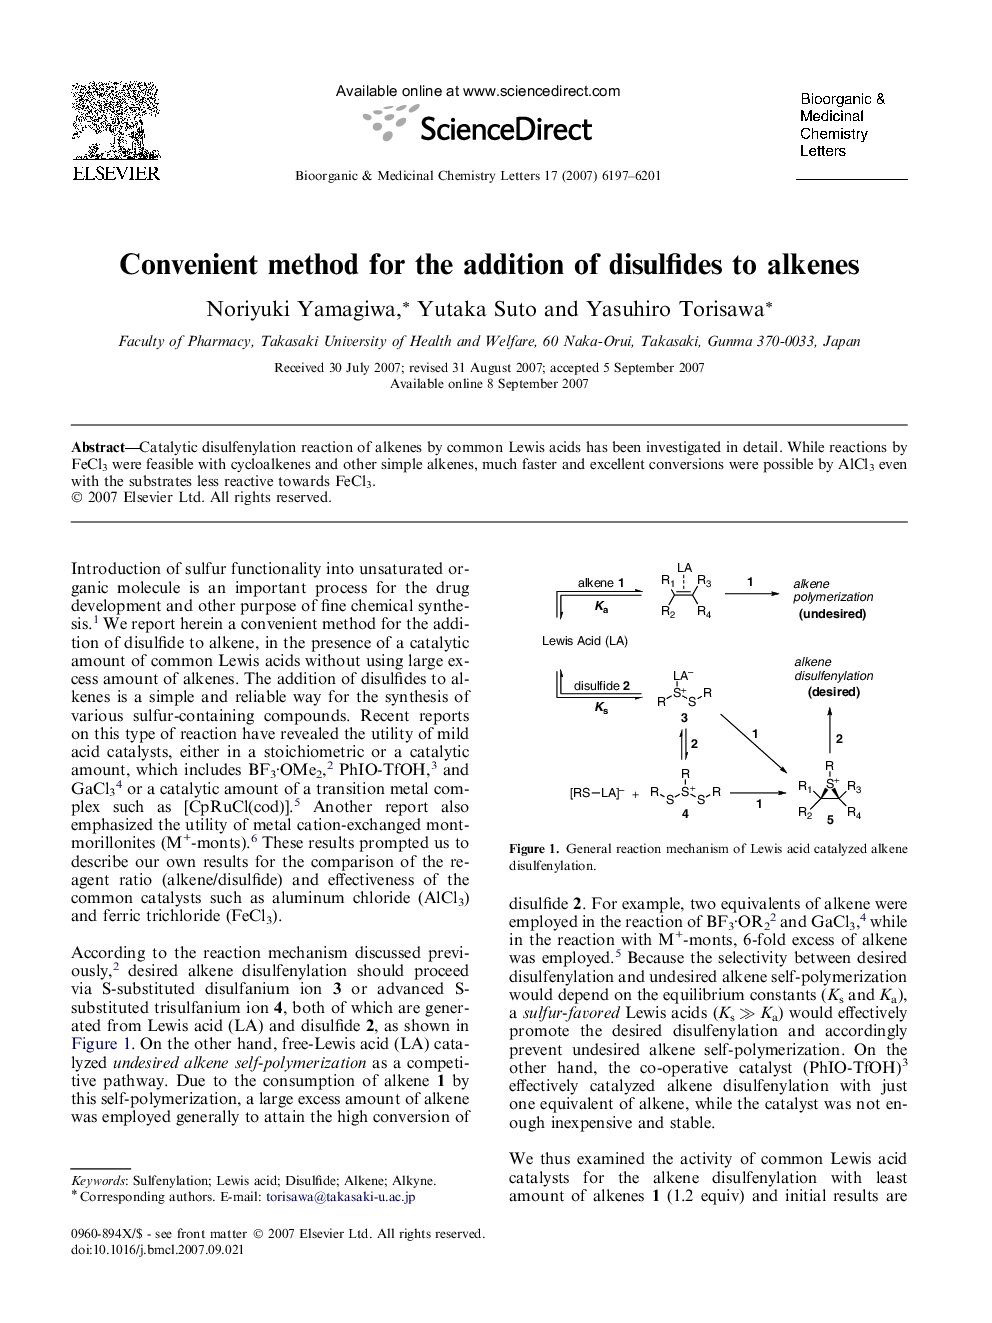 Convenient method for the addition of disulfides to alkenes